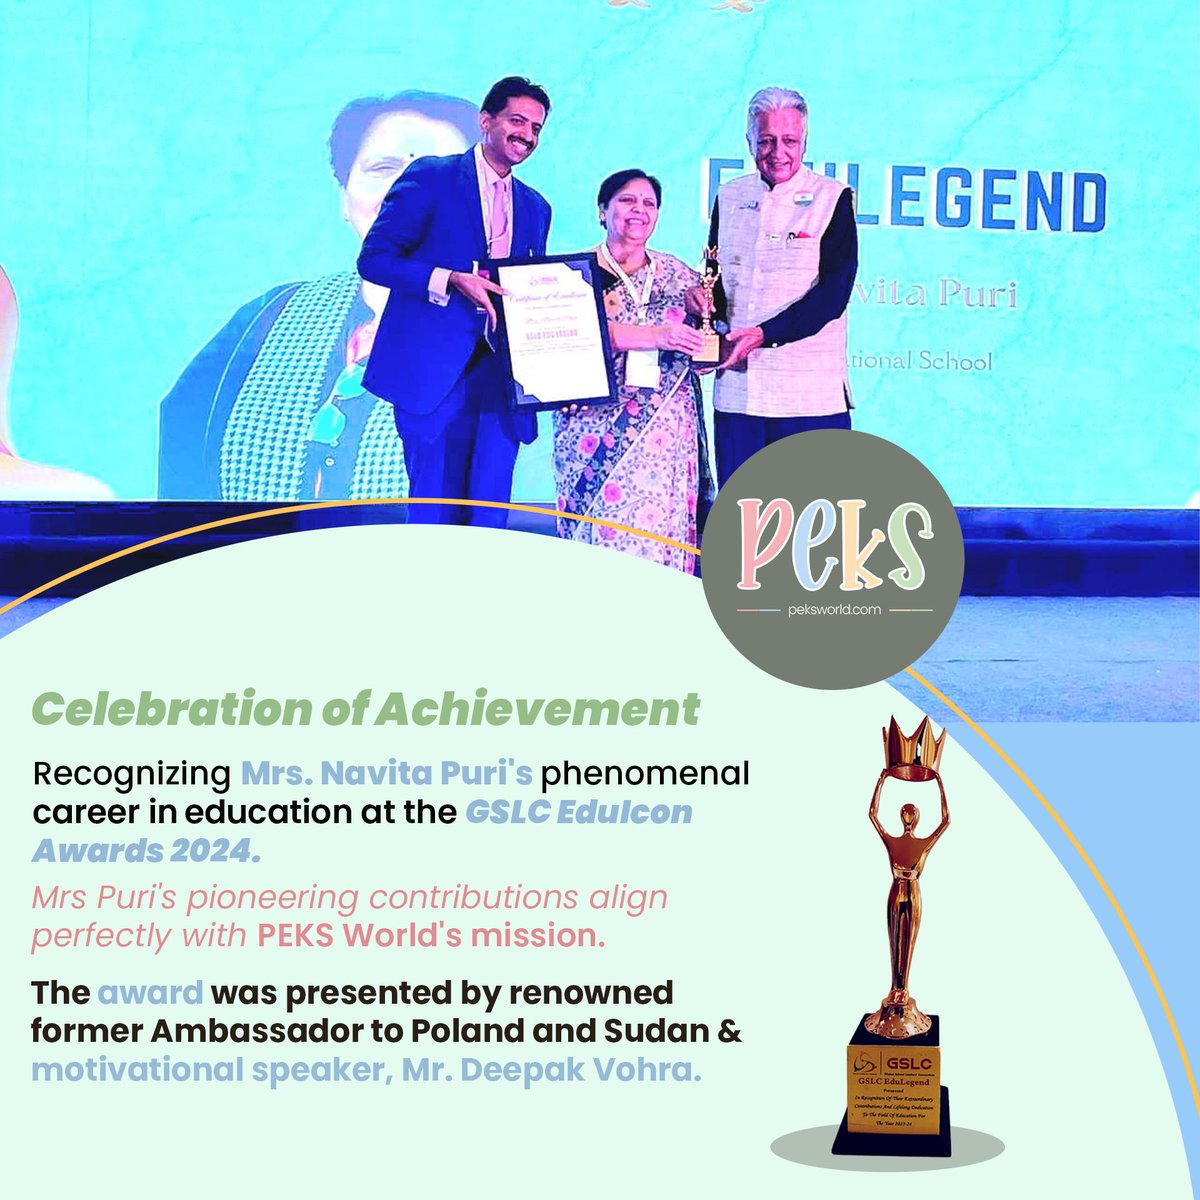 Celebrating an icon in education! PEKS World proudly commemorates Mrs Navita Puri's exceptional 42-year journey in education and her prestigious recognition as an EduLegend at the GSLC EduIcon Awards 2024🏆🌟

#EduLegend #PEKS #ExperienceADifferentWorld #EarlyLearning